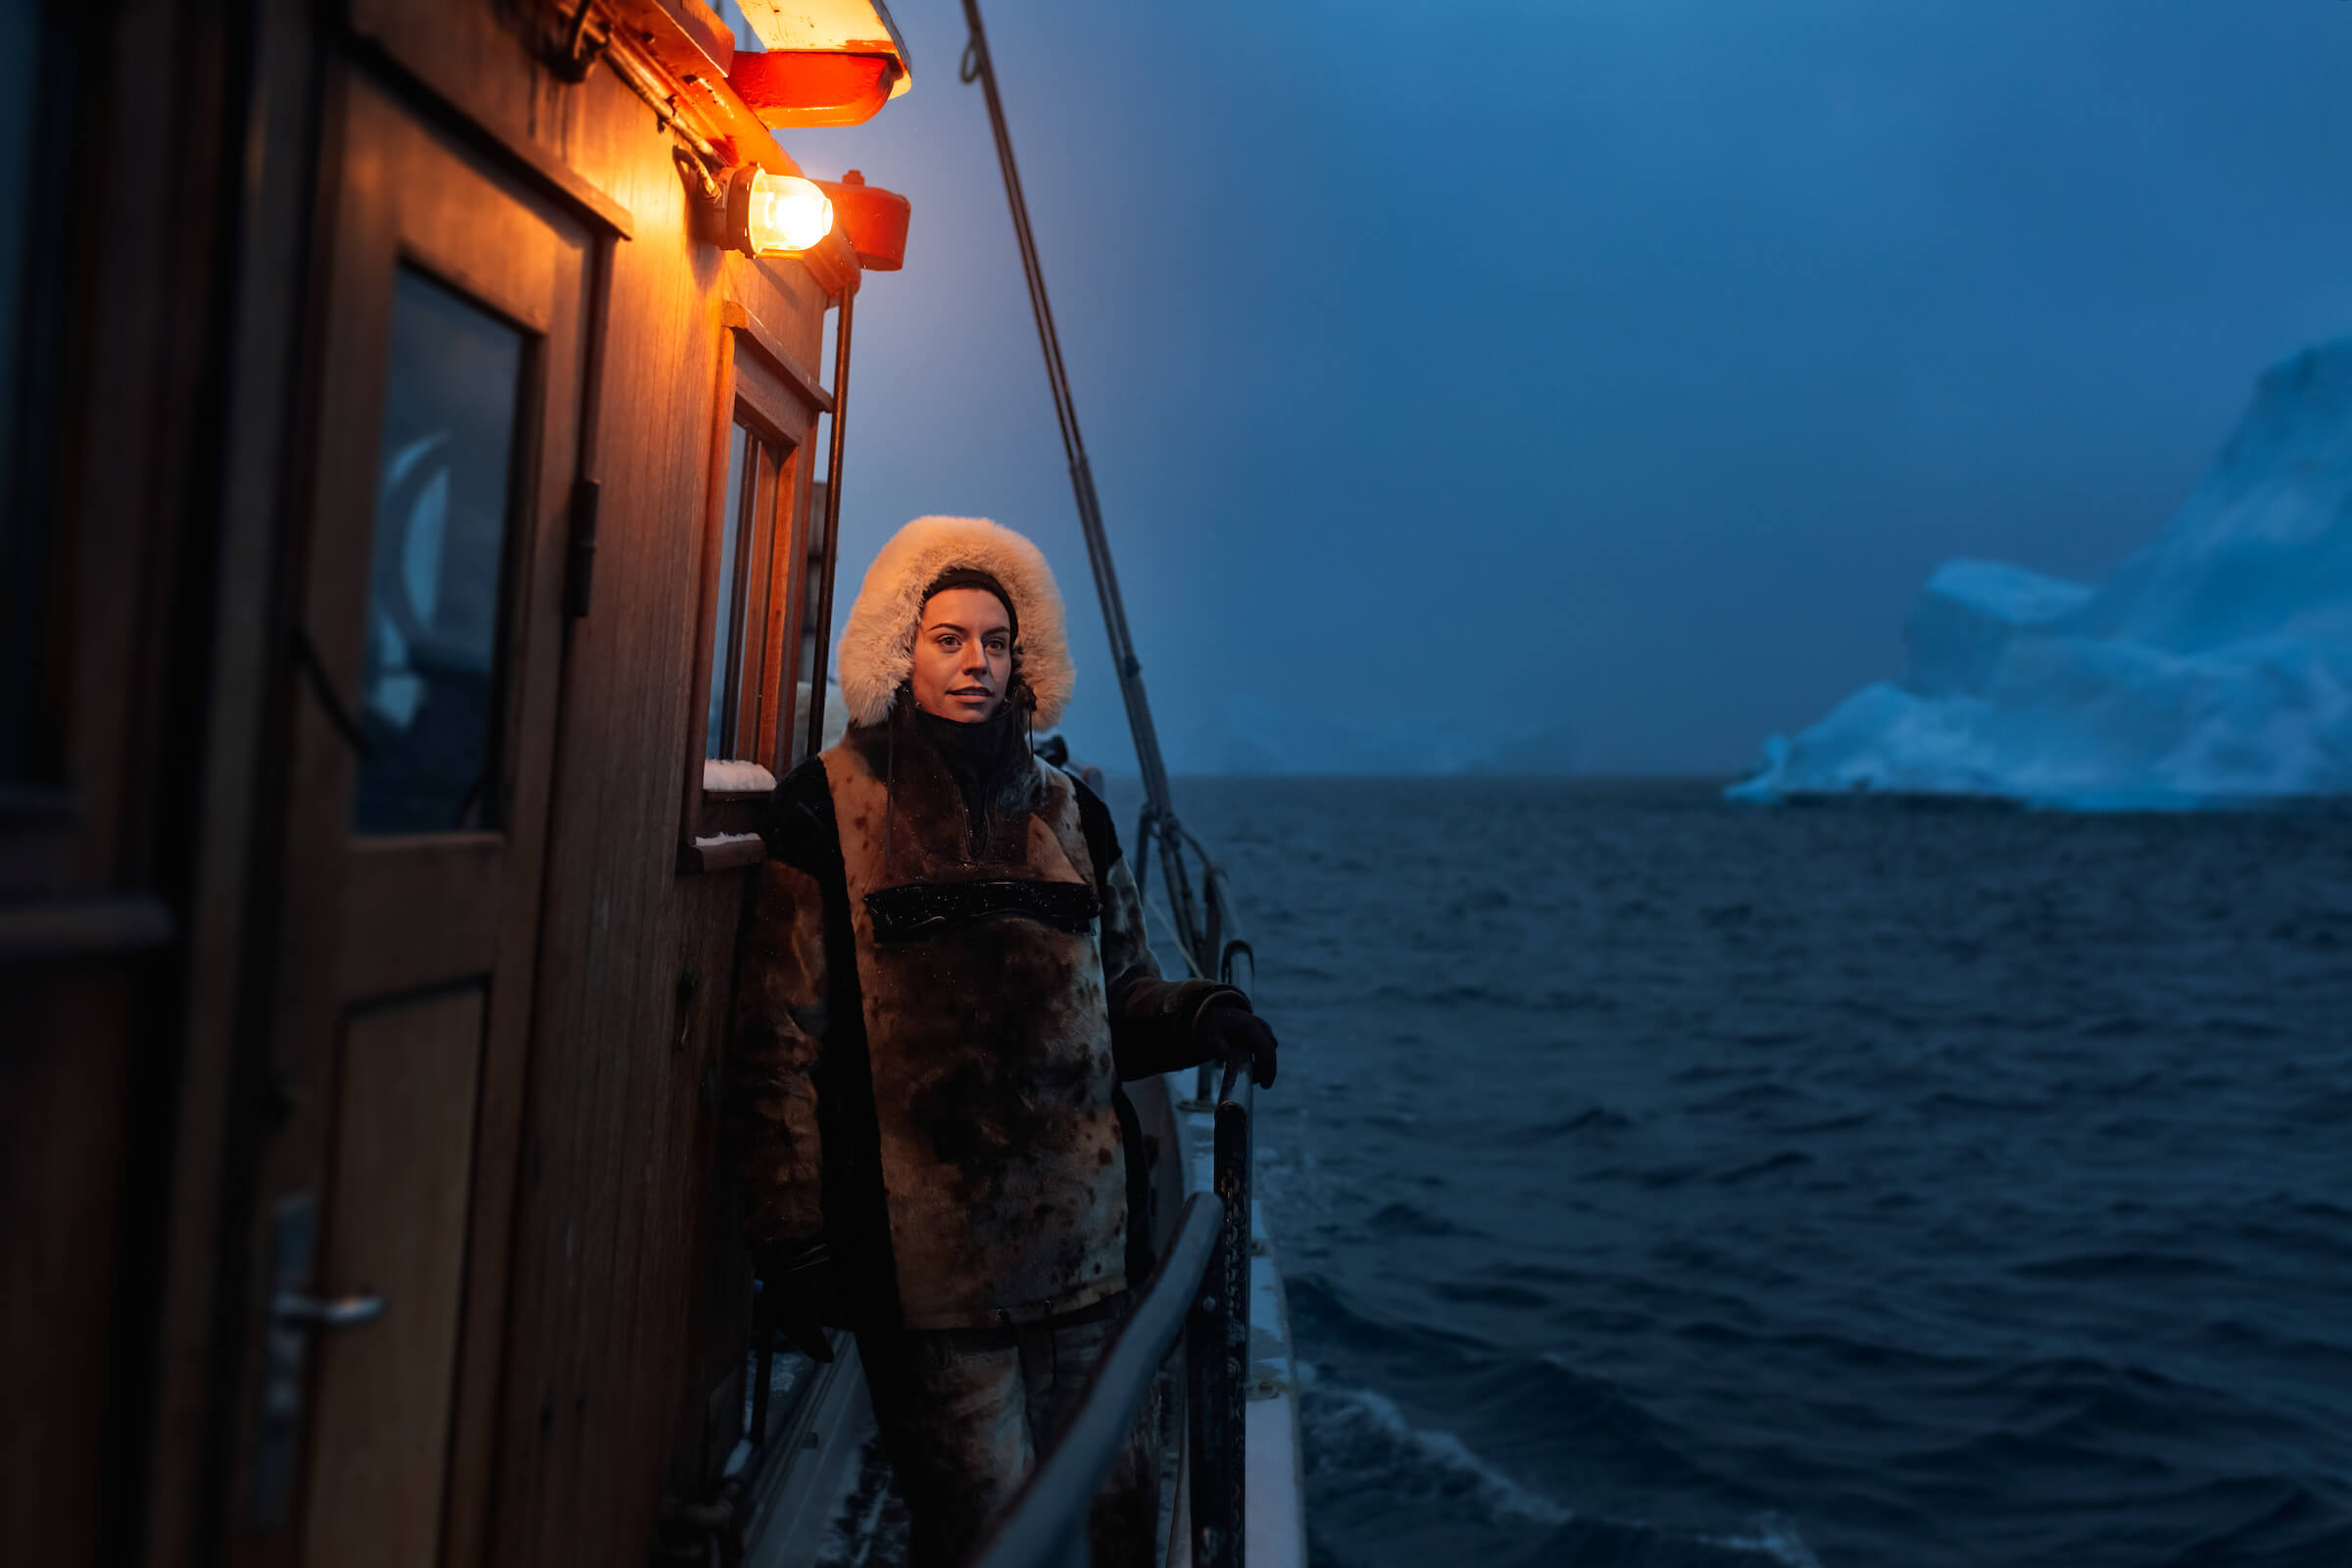 Australian social media influencer Sorelle Amore on a iceberg boat tour during the blue hour in the Ilulissat icegjord in Greenland. By Rebecca Gustafsson